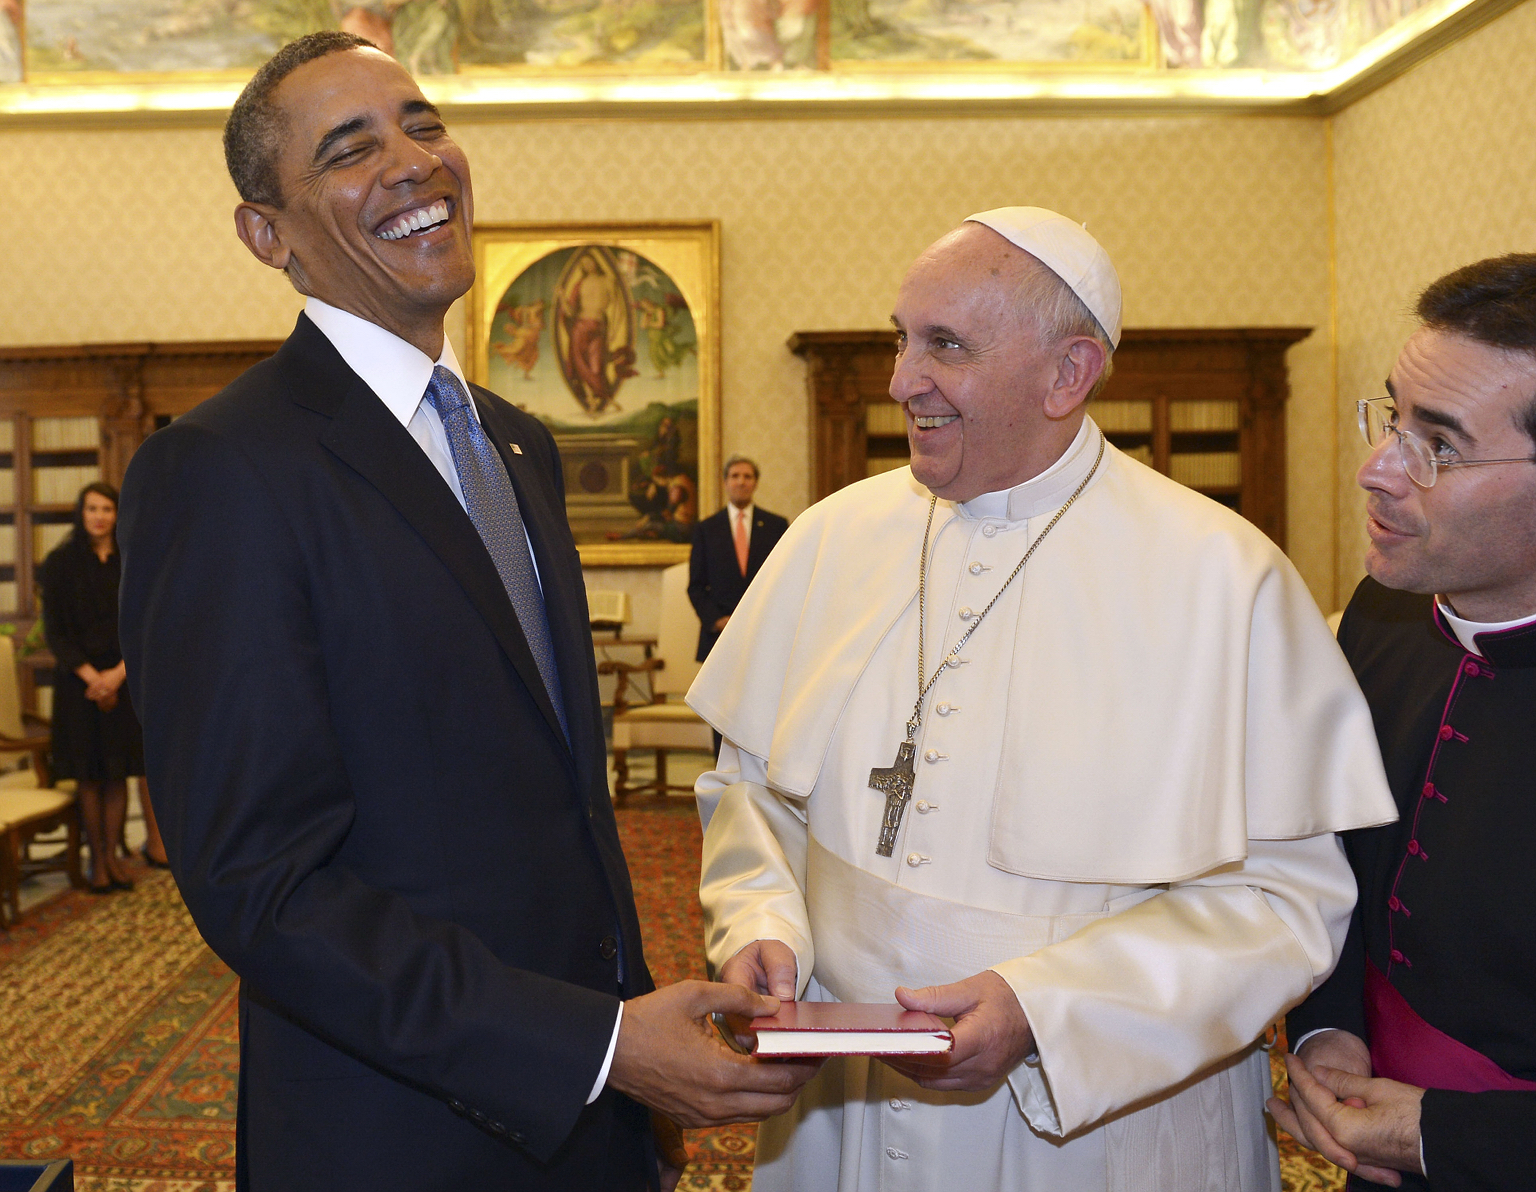 Obama Smile As They Exchange Gifts At The Vatican Thursday  Mr  Obama    